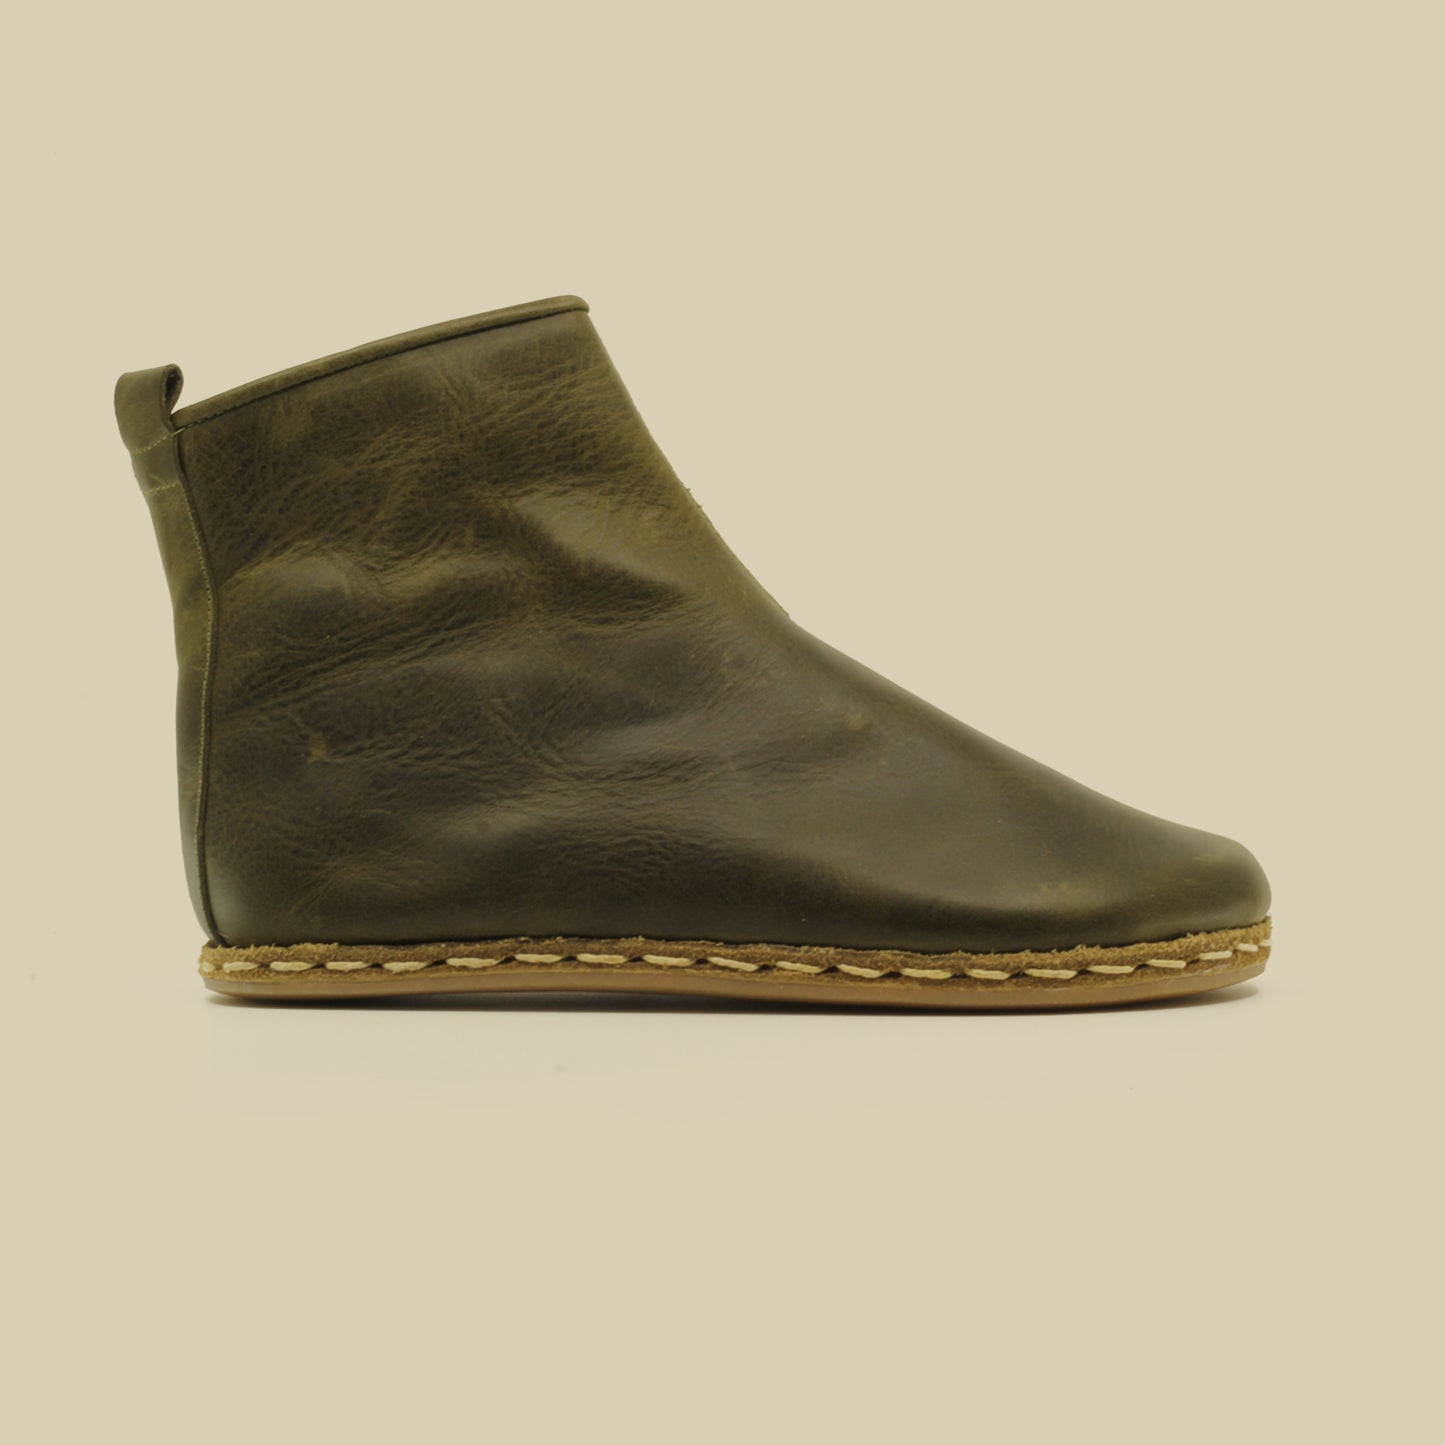 Crazy Olive Green Ankle Boots: Zippered Barefoot Mastery & Zero Drop Sole